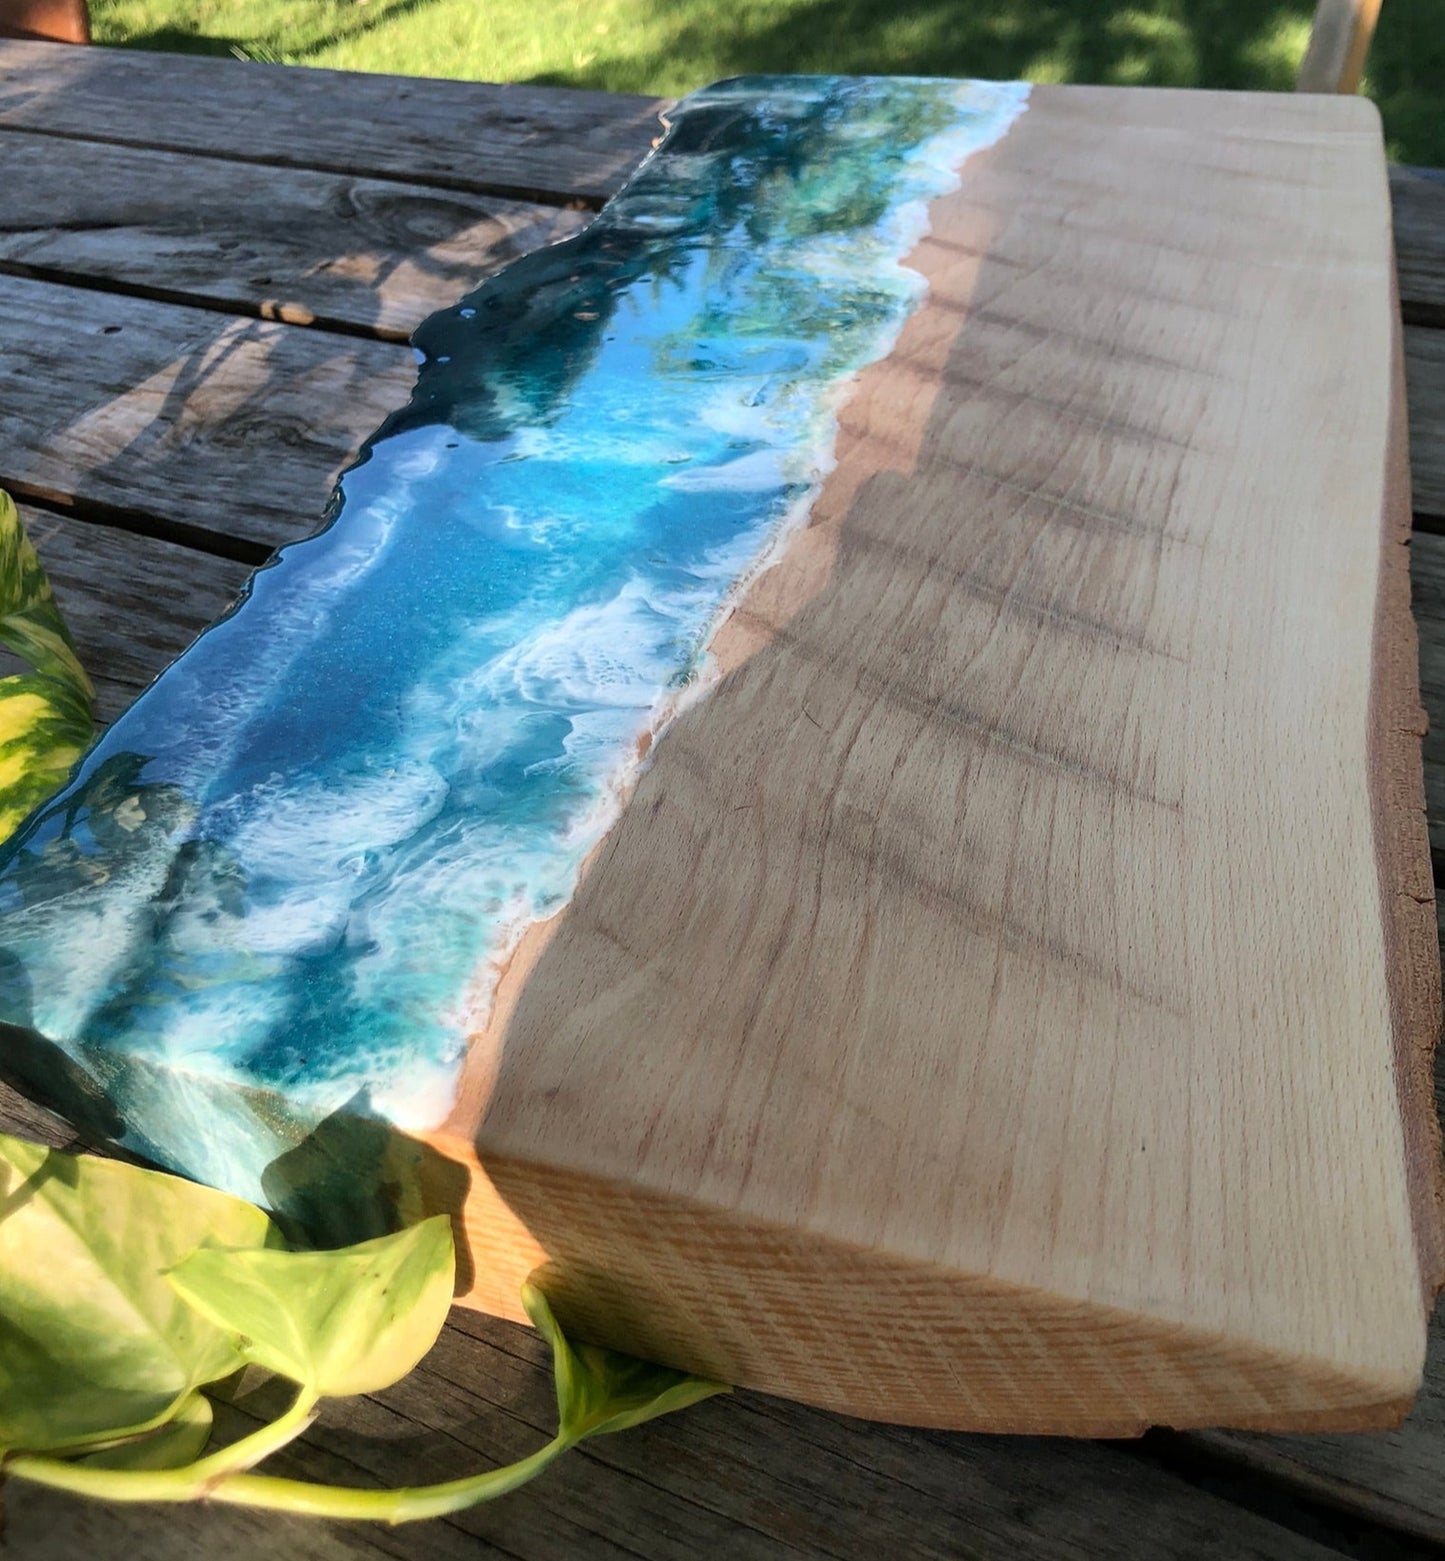 *** SOLD *** Stormy Caribbean Charcuterie Board